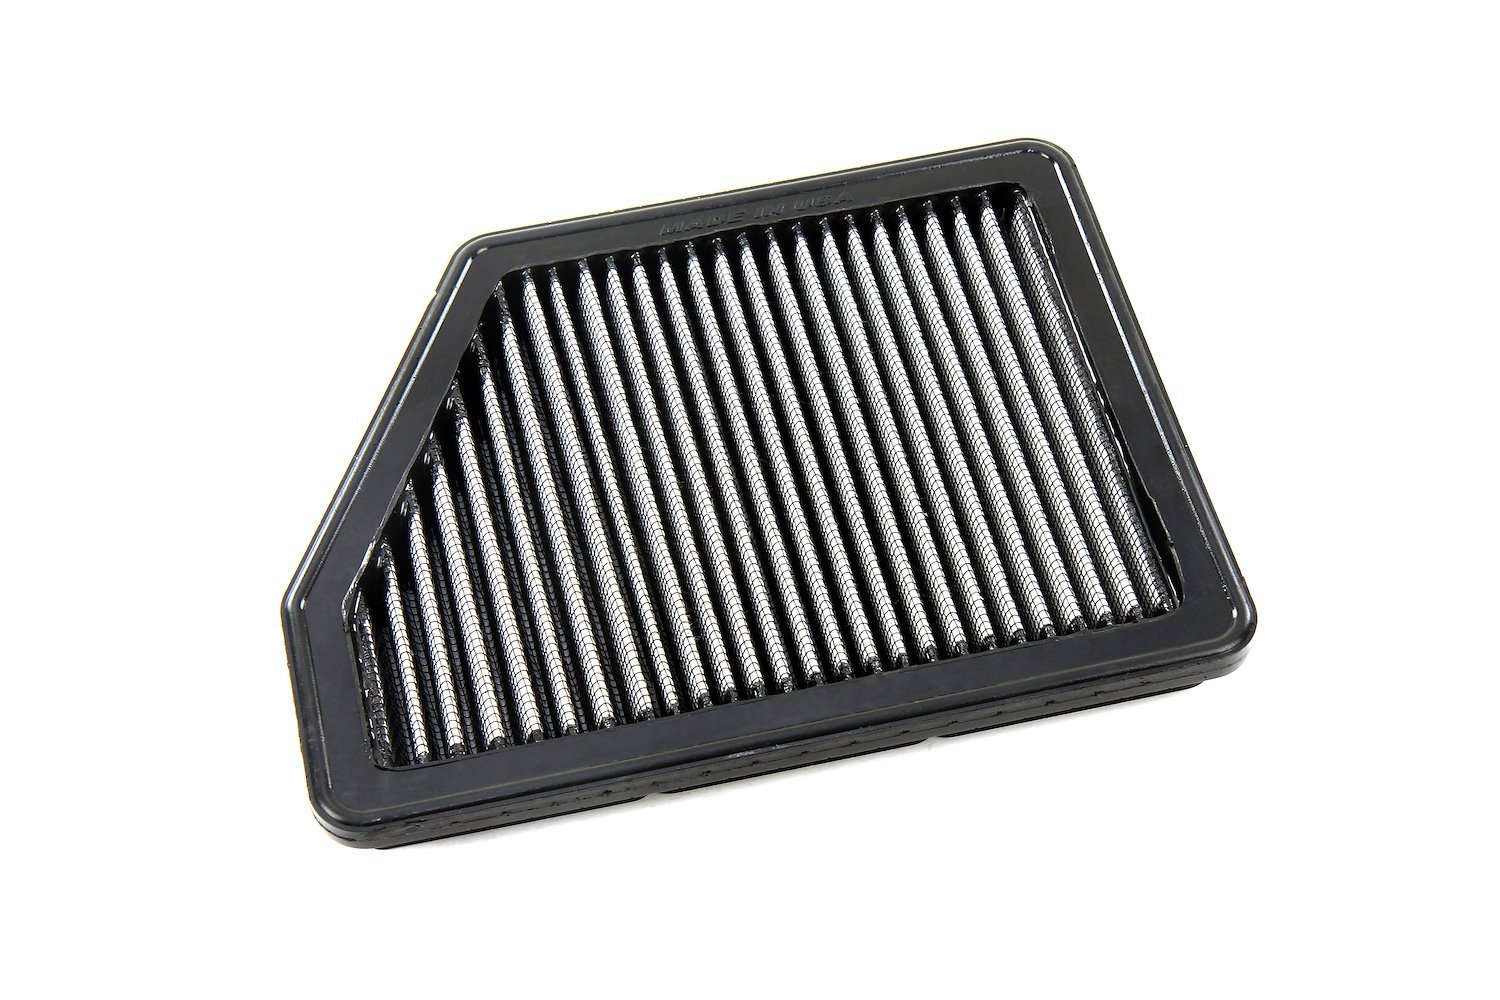 HPS-457387 Performance Drop-In Air Filter, Directly Replaces OEM Drop-In Panel Filter, Improves Performance & Fuel Economy